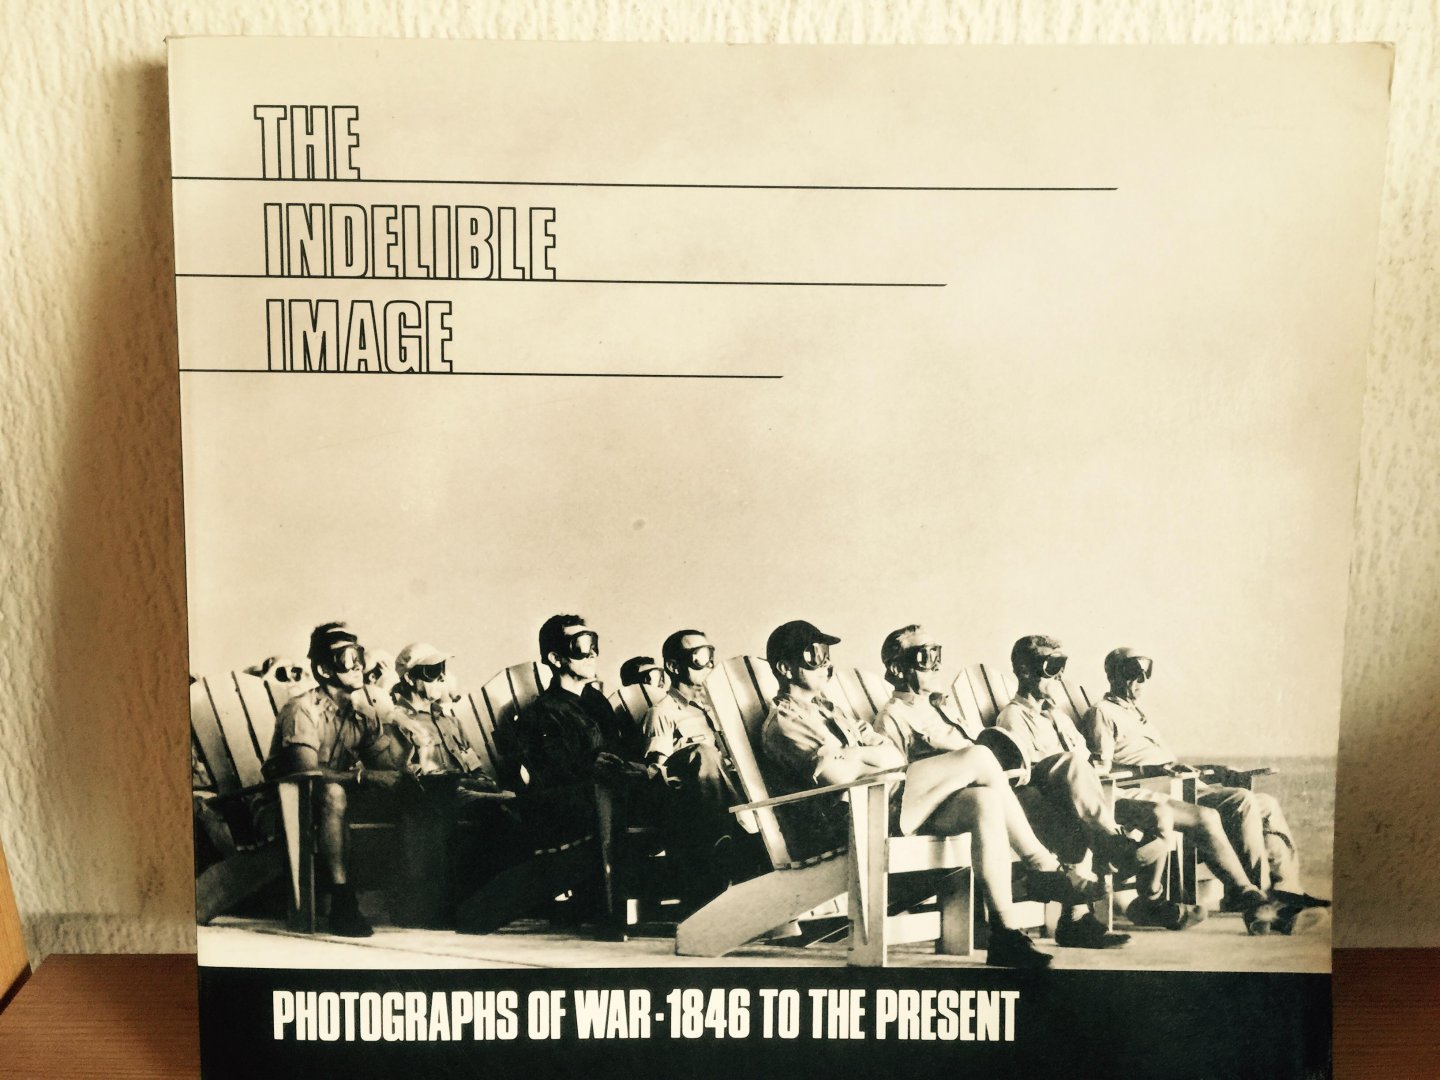 Frances Fralin - The Indelible Image , photographs of War - 1846 to the present